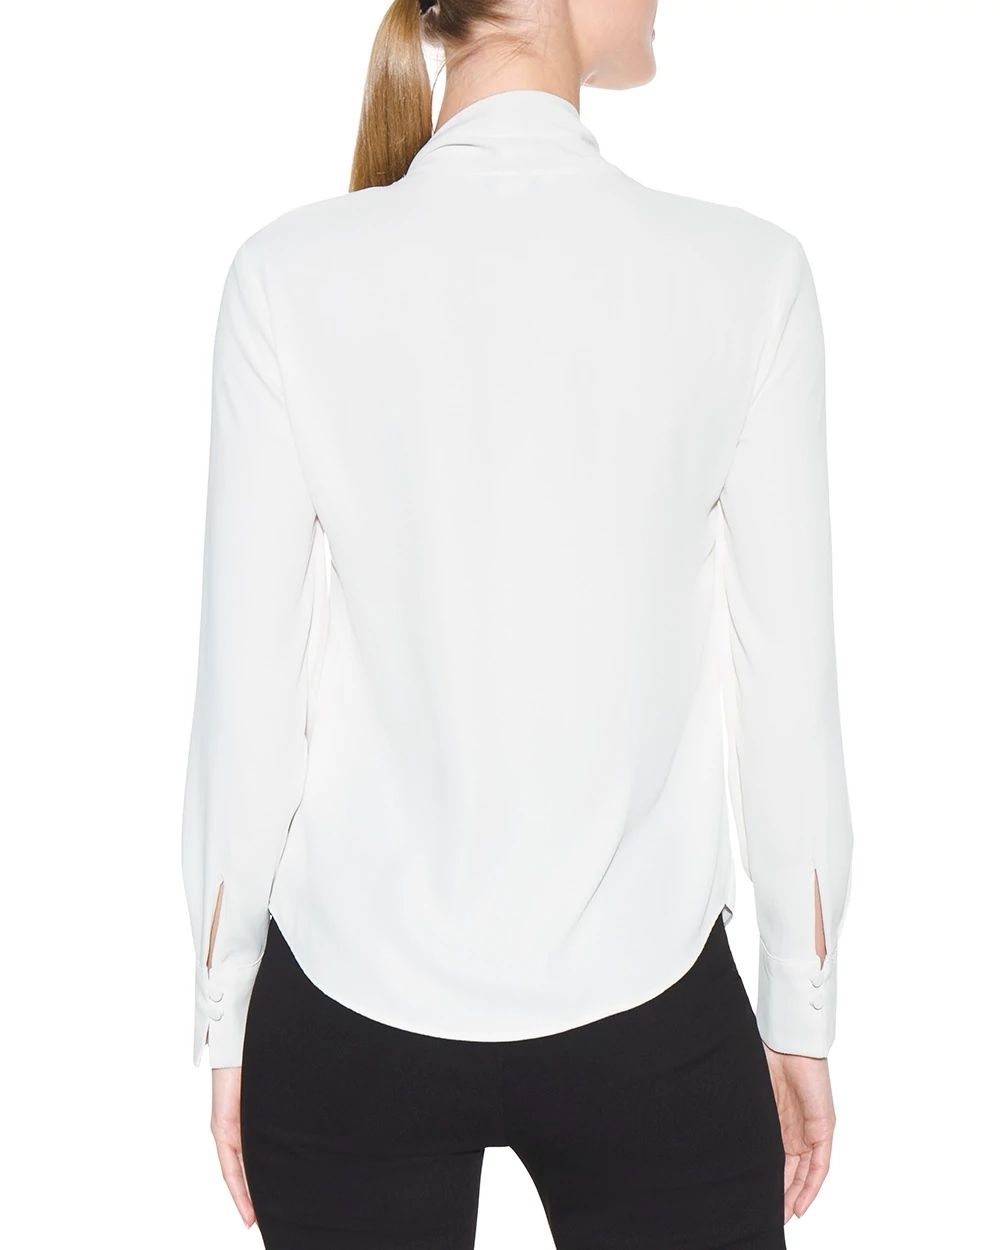 Outlet WHBM Tie-Neck Blouse click to view larger image.